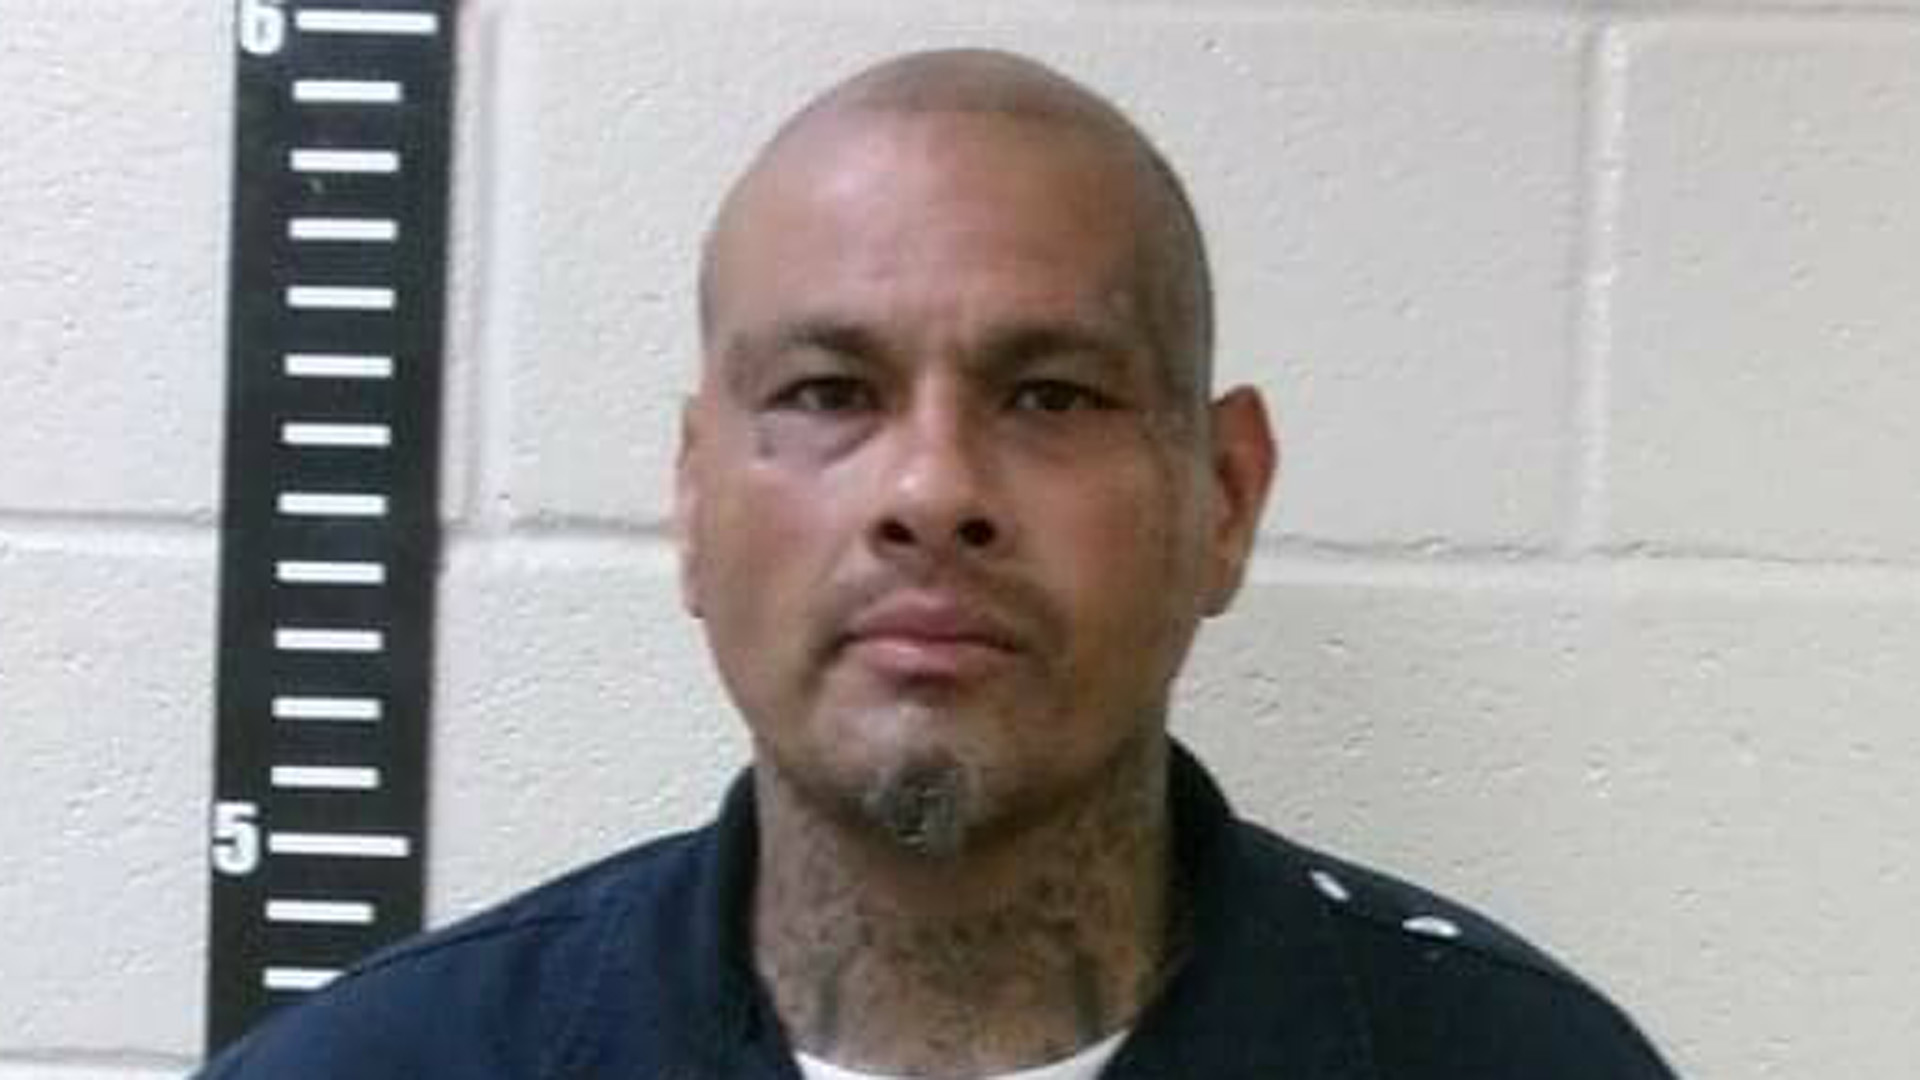 San Benito police arrest man on Texas’ most wanted fugitives list